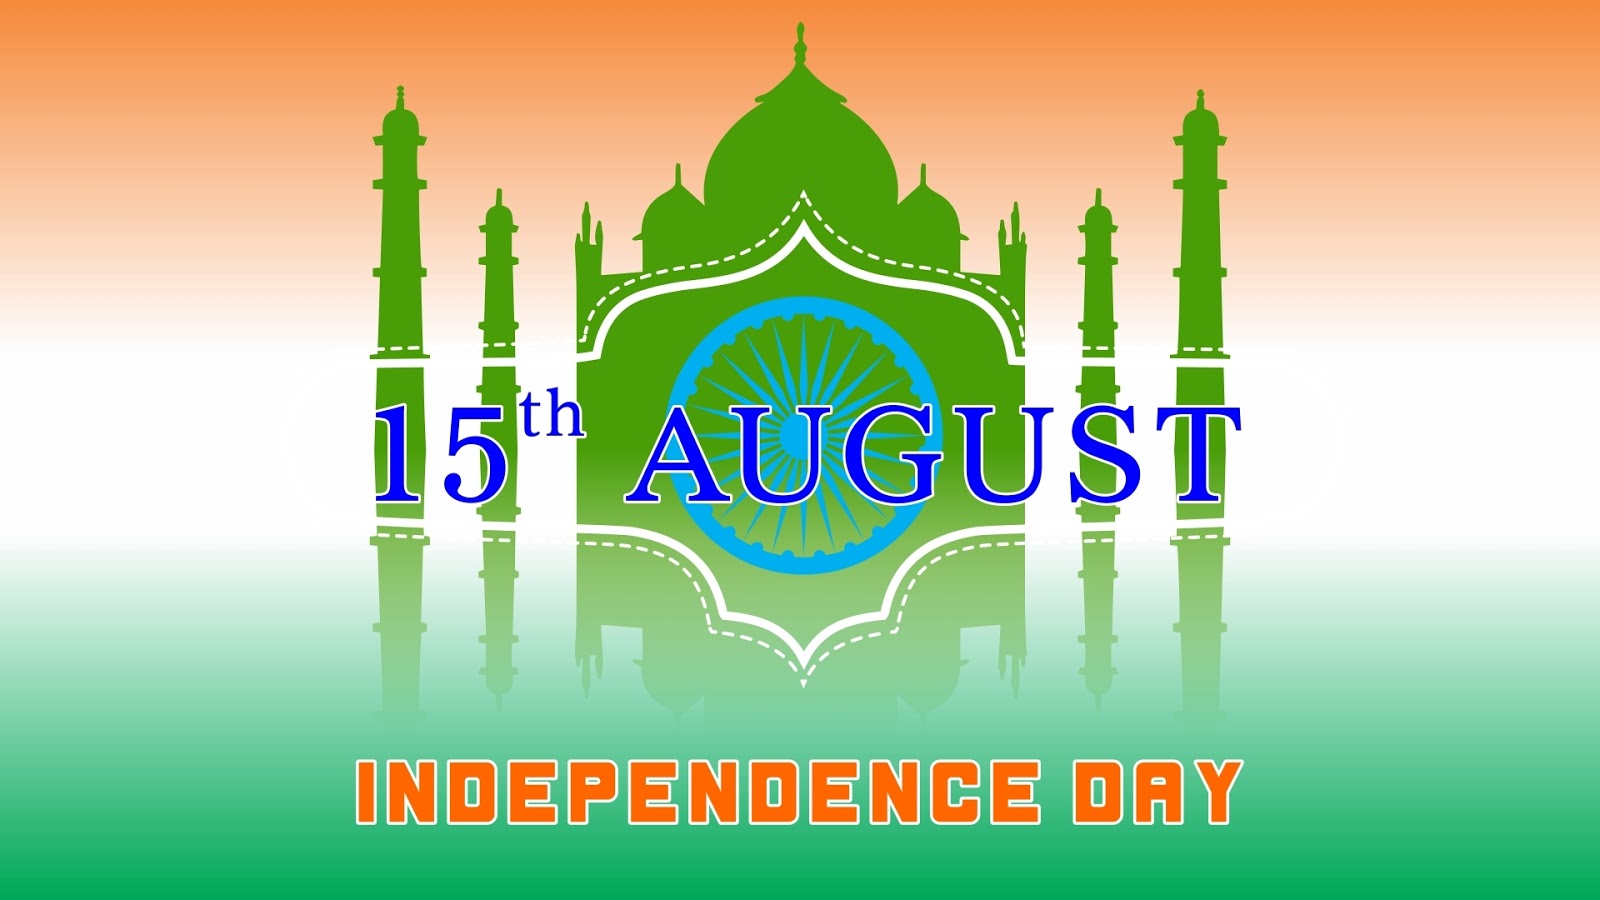 15 August Independence Day Wallpaper Download - Hd Wallpaper 15 August Hd - HD Wallpaper 